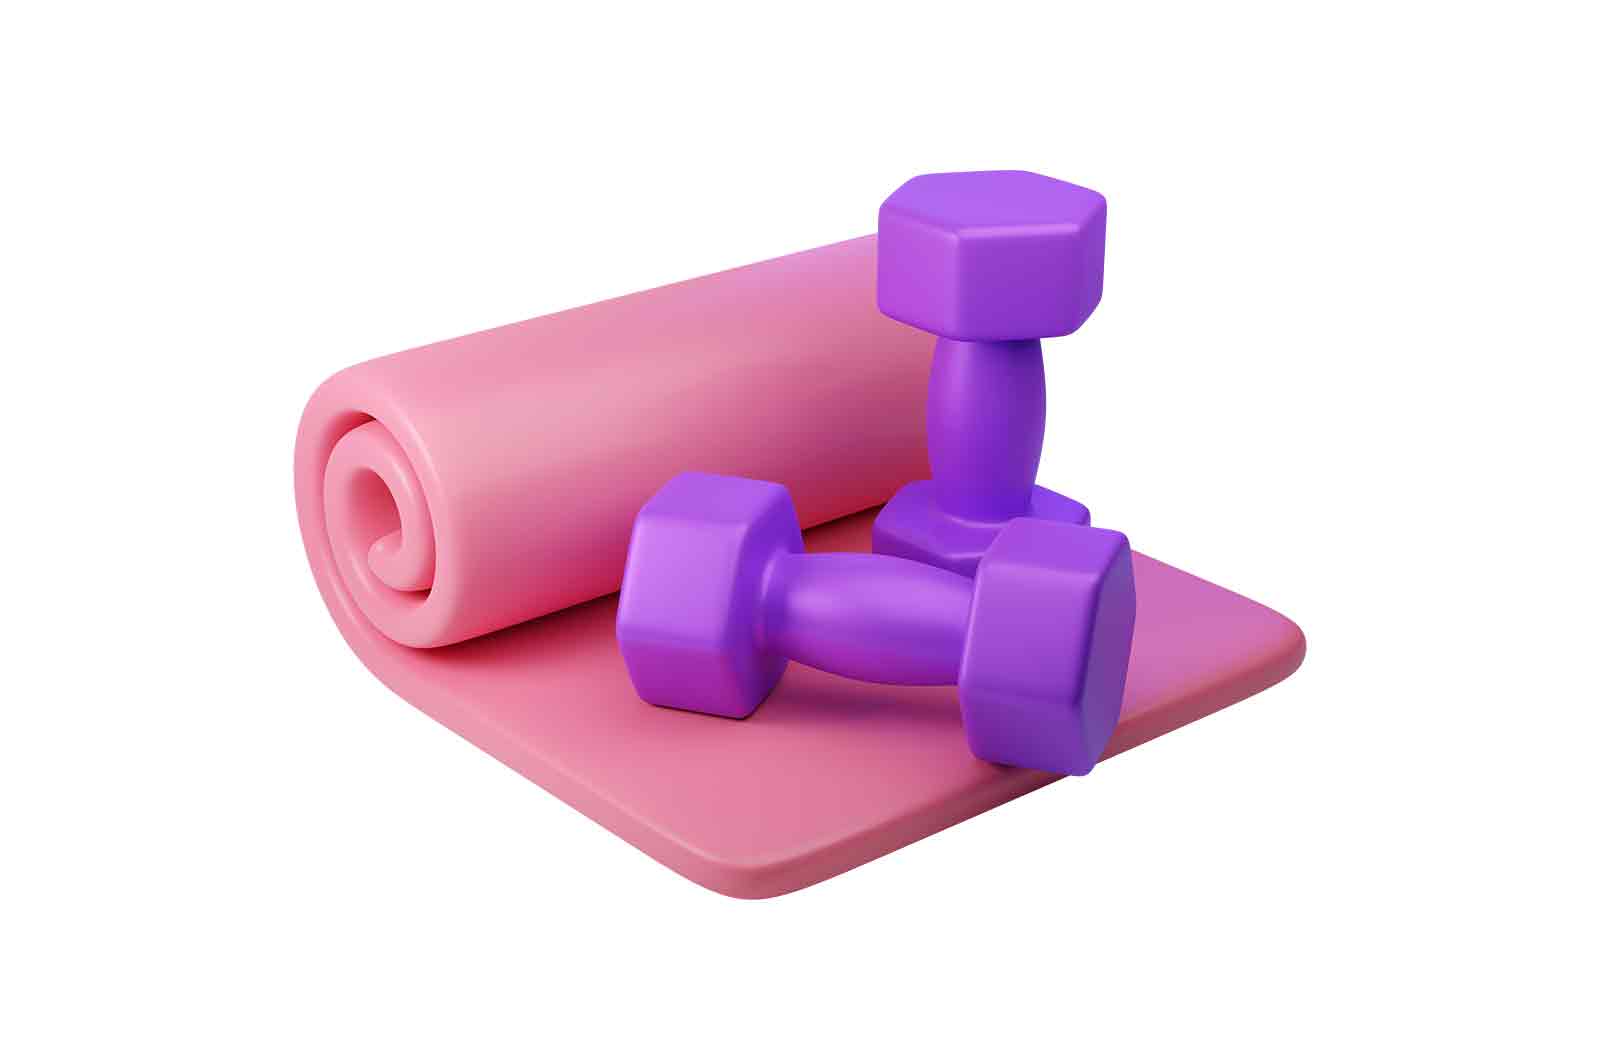 Set of dumbbells and fitness mat 3d rendered illustration. Sports equipment item. Sport and healthy lifestyle concept